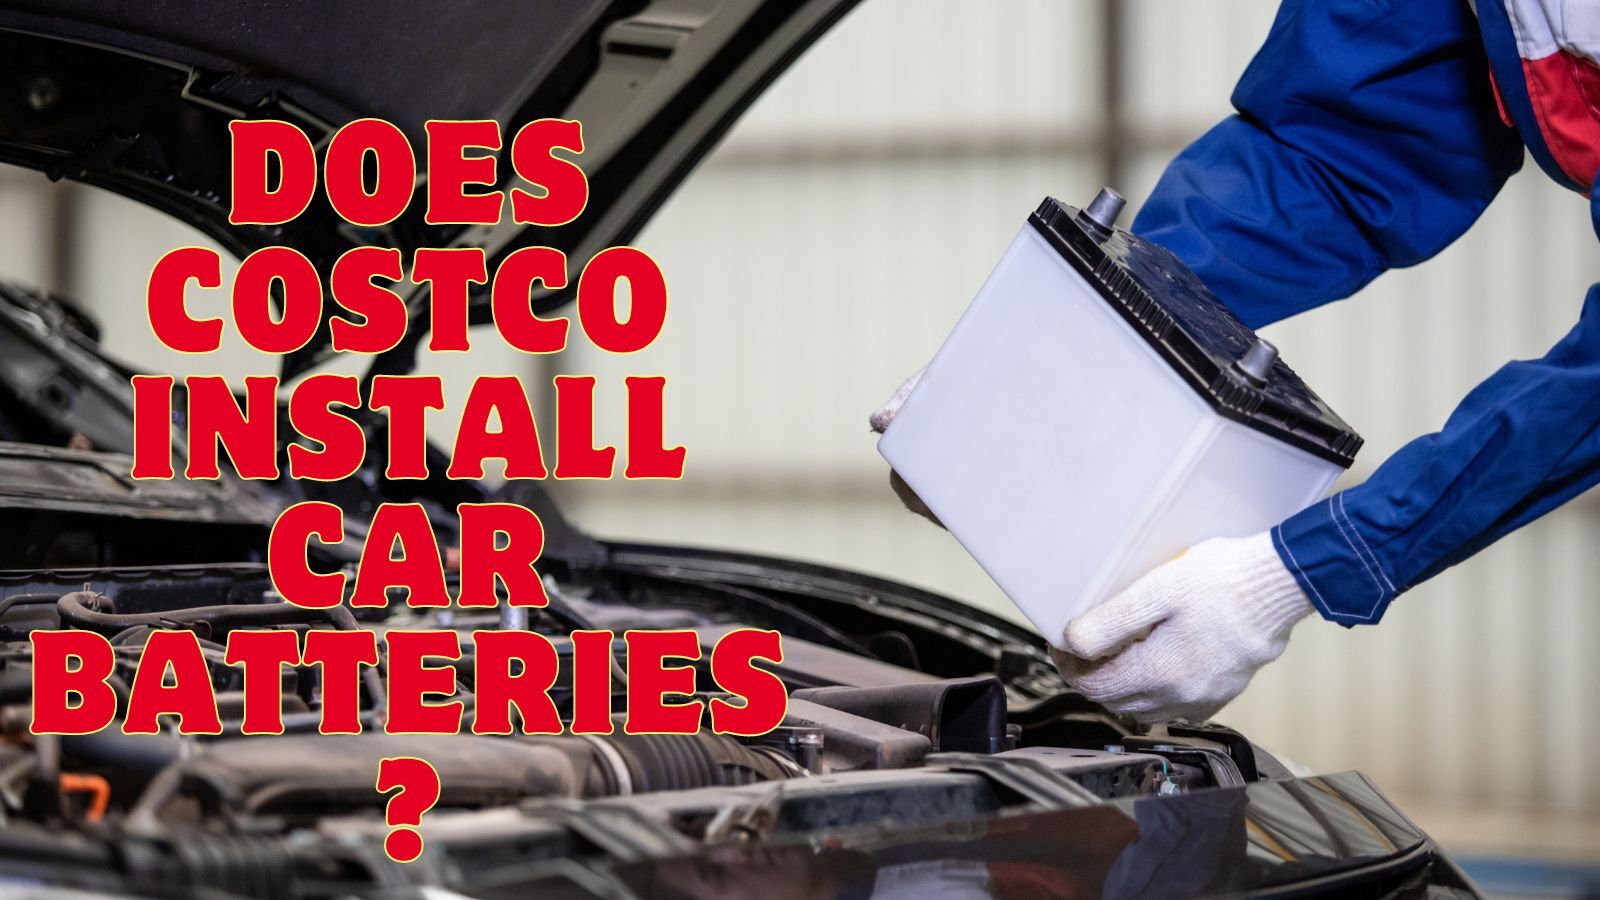 Does Costco Install Car Batteries? (Try These Instead!)